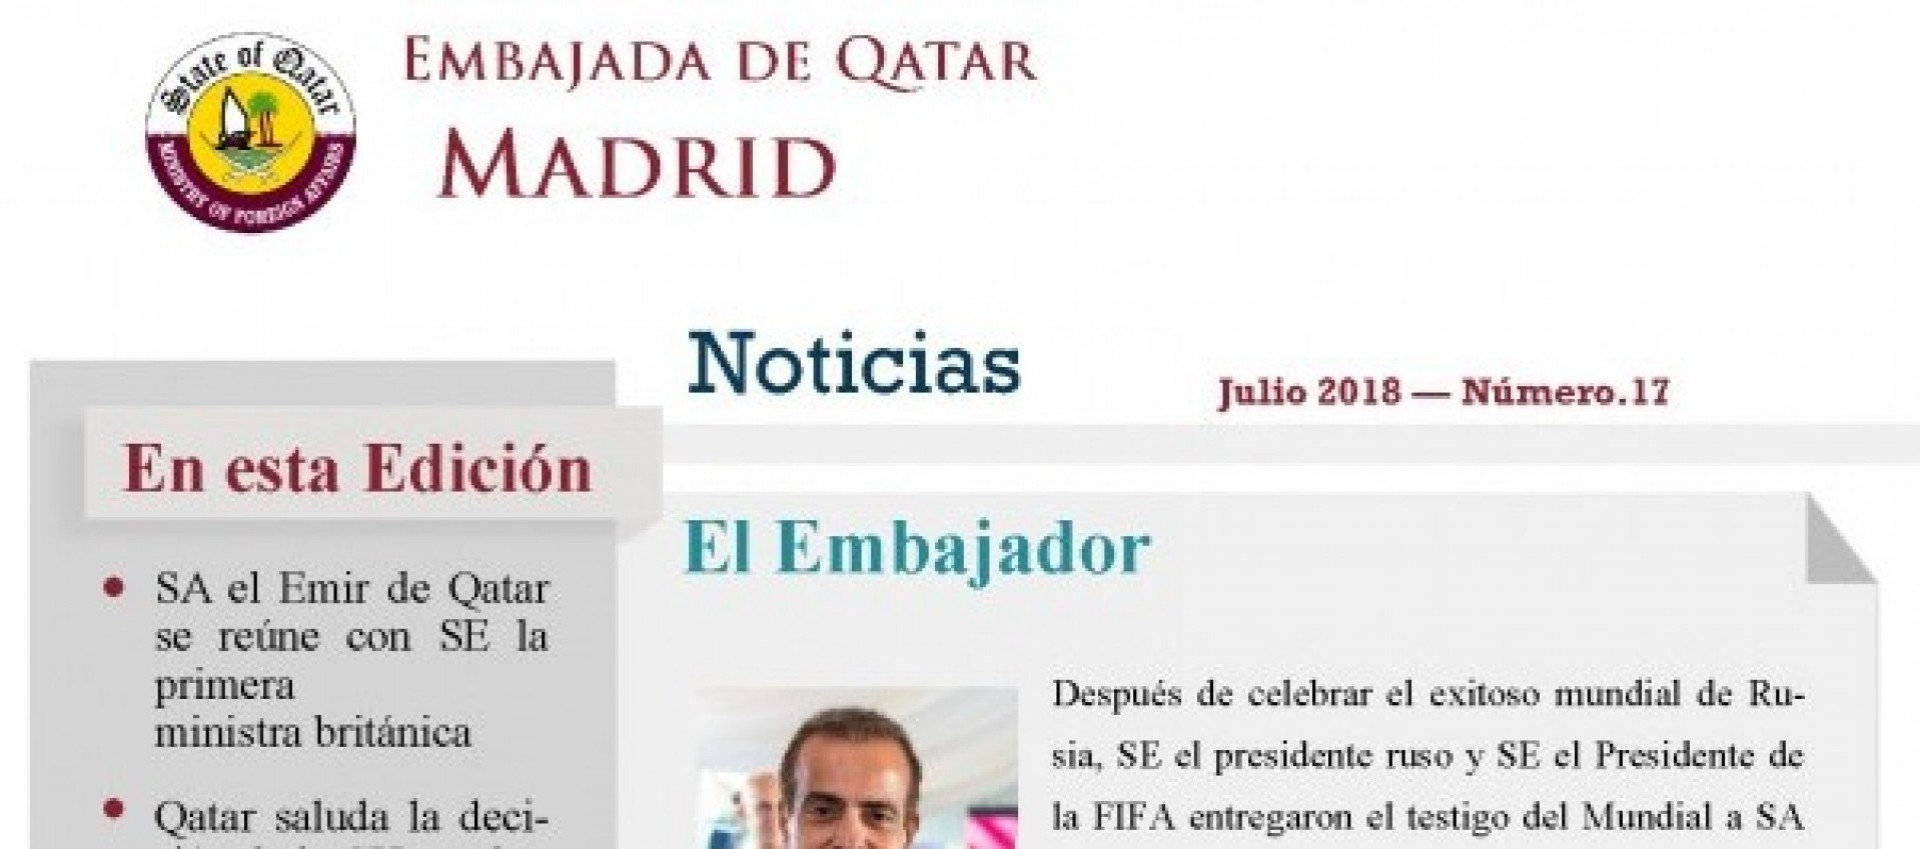 Welcome to the Qatar ambassador in Madrid